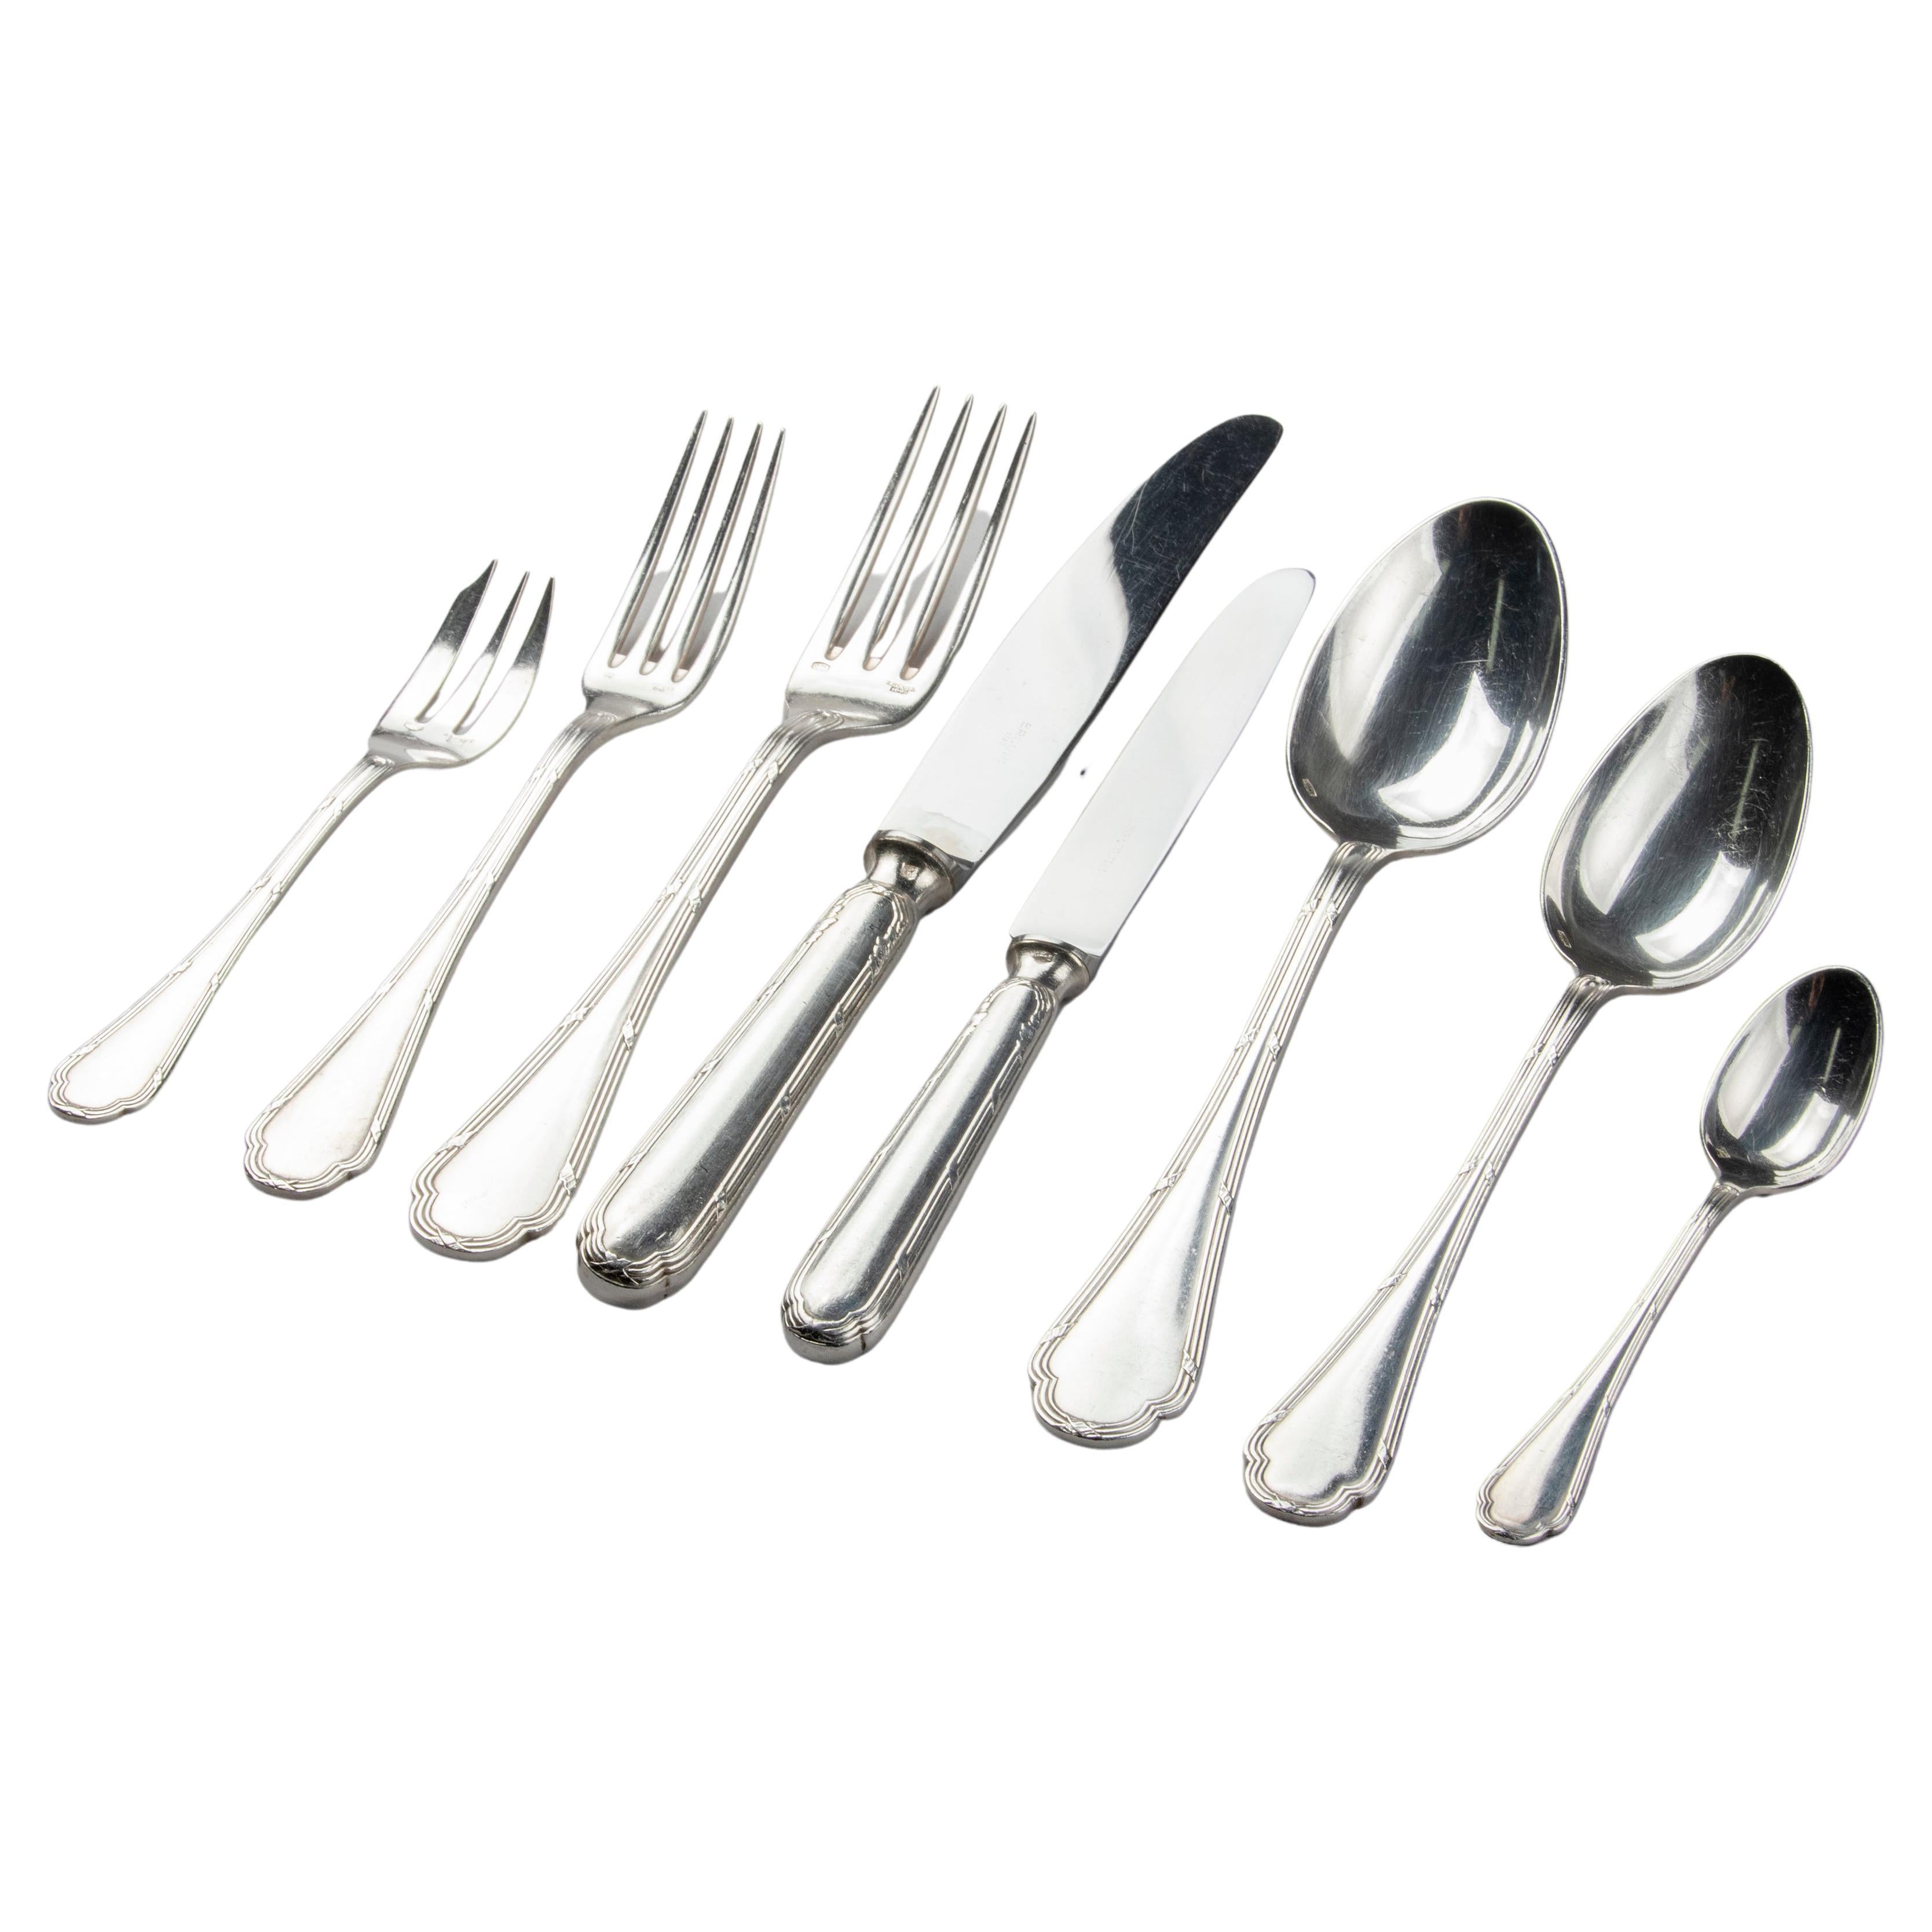 96-Piece Set of Silver-Plate Flatware for 12 Persons, Ercuis Model Ribbon